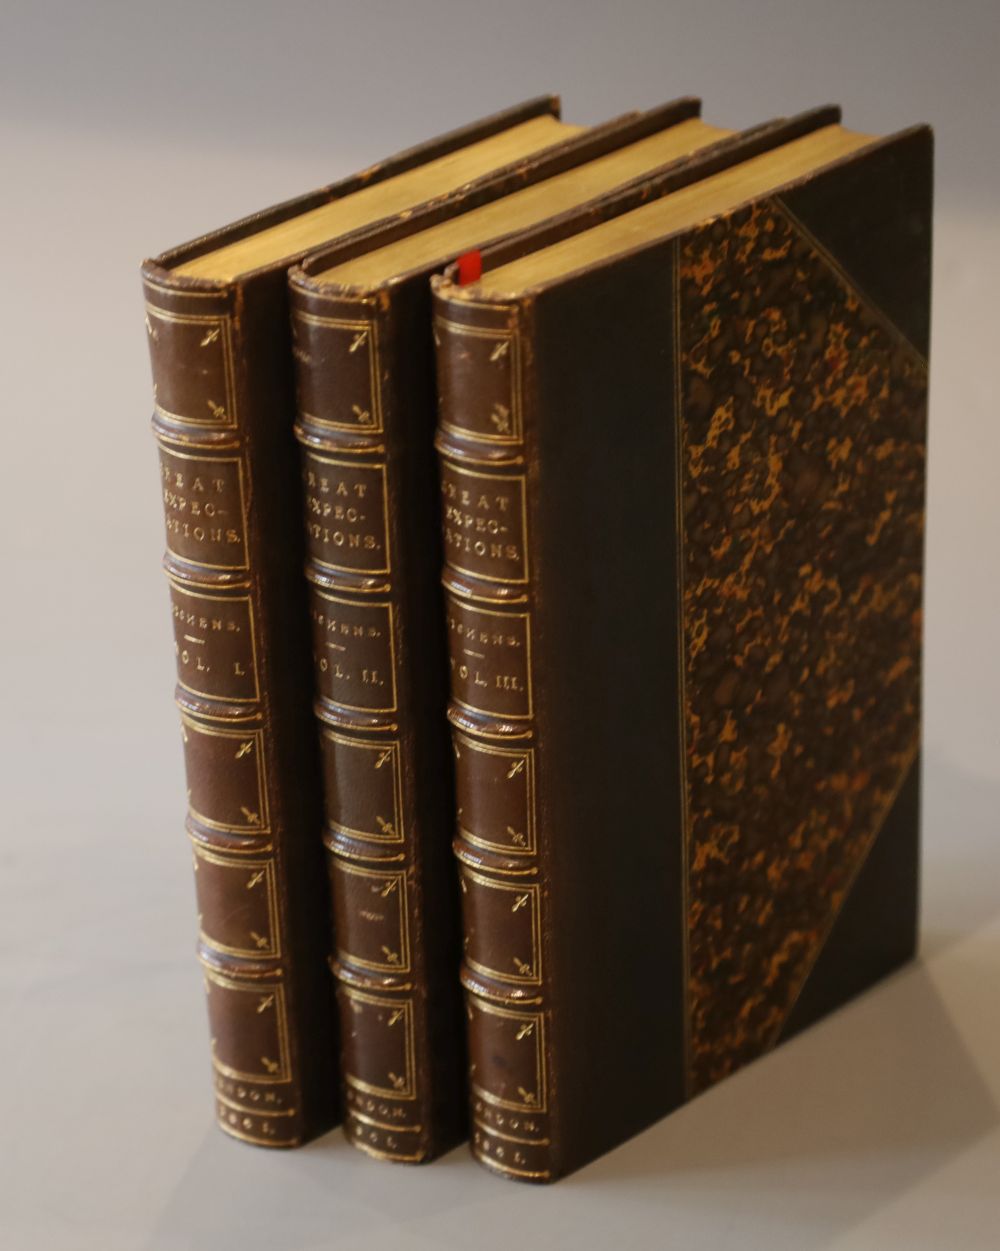 Dickens, Charles - Great Expectations, 1st edition (early issue), 3 vols, with an engraved portrait (not called-for) of the dedicatee (